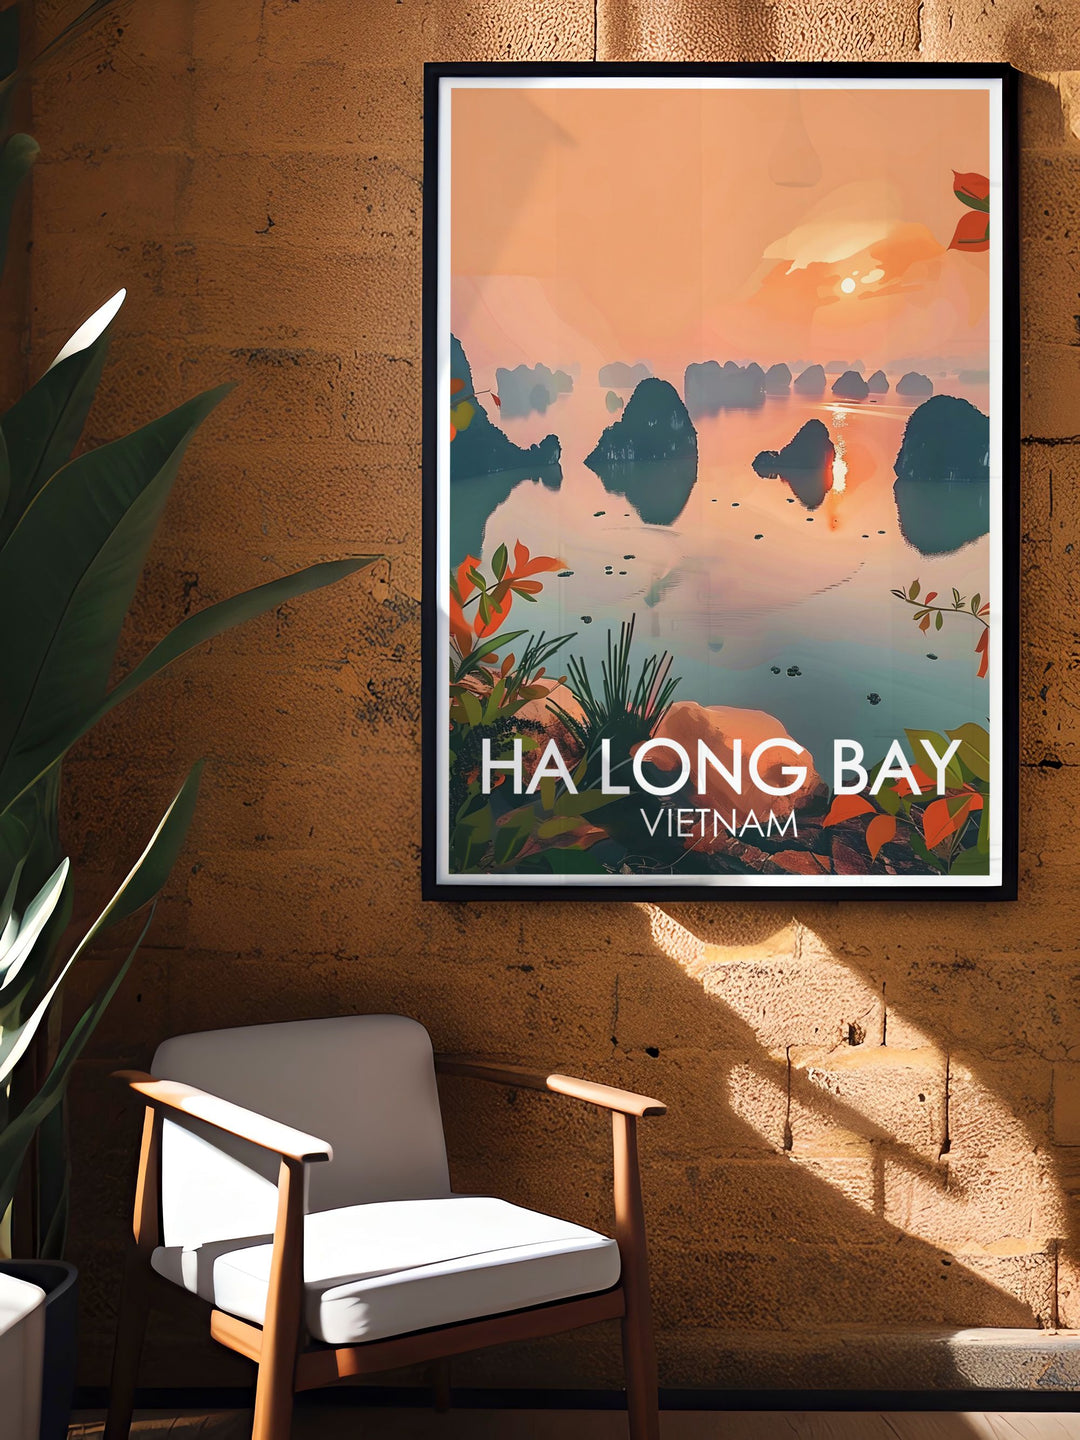 Featuring the dramatic cliffs and lush vegetation of Dragon Tails Island, this art print highlights the mythical landscape of Ha Long Bay, making it an ideal addition to any room.